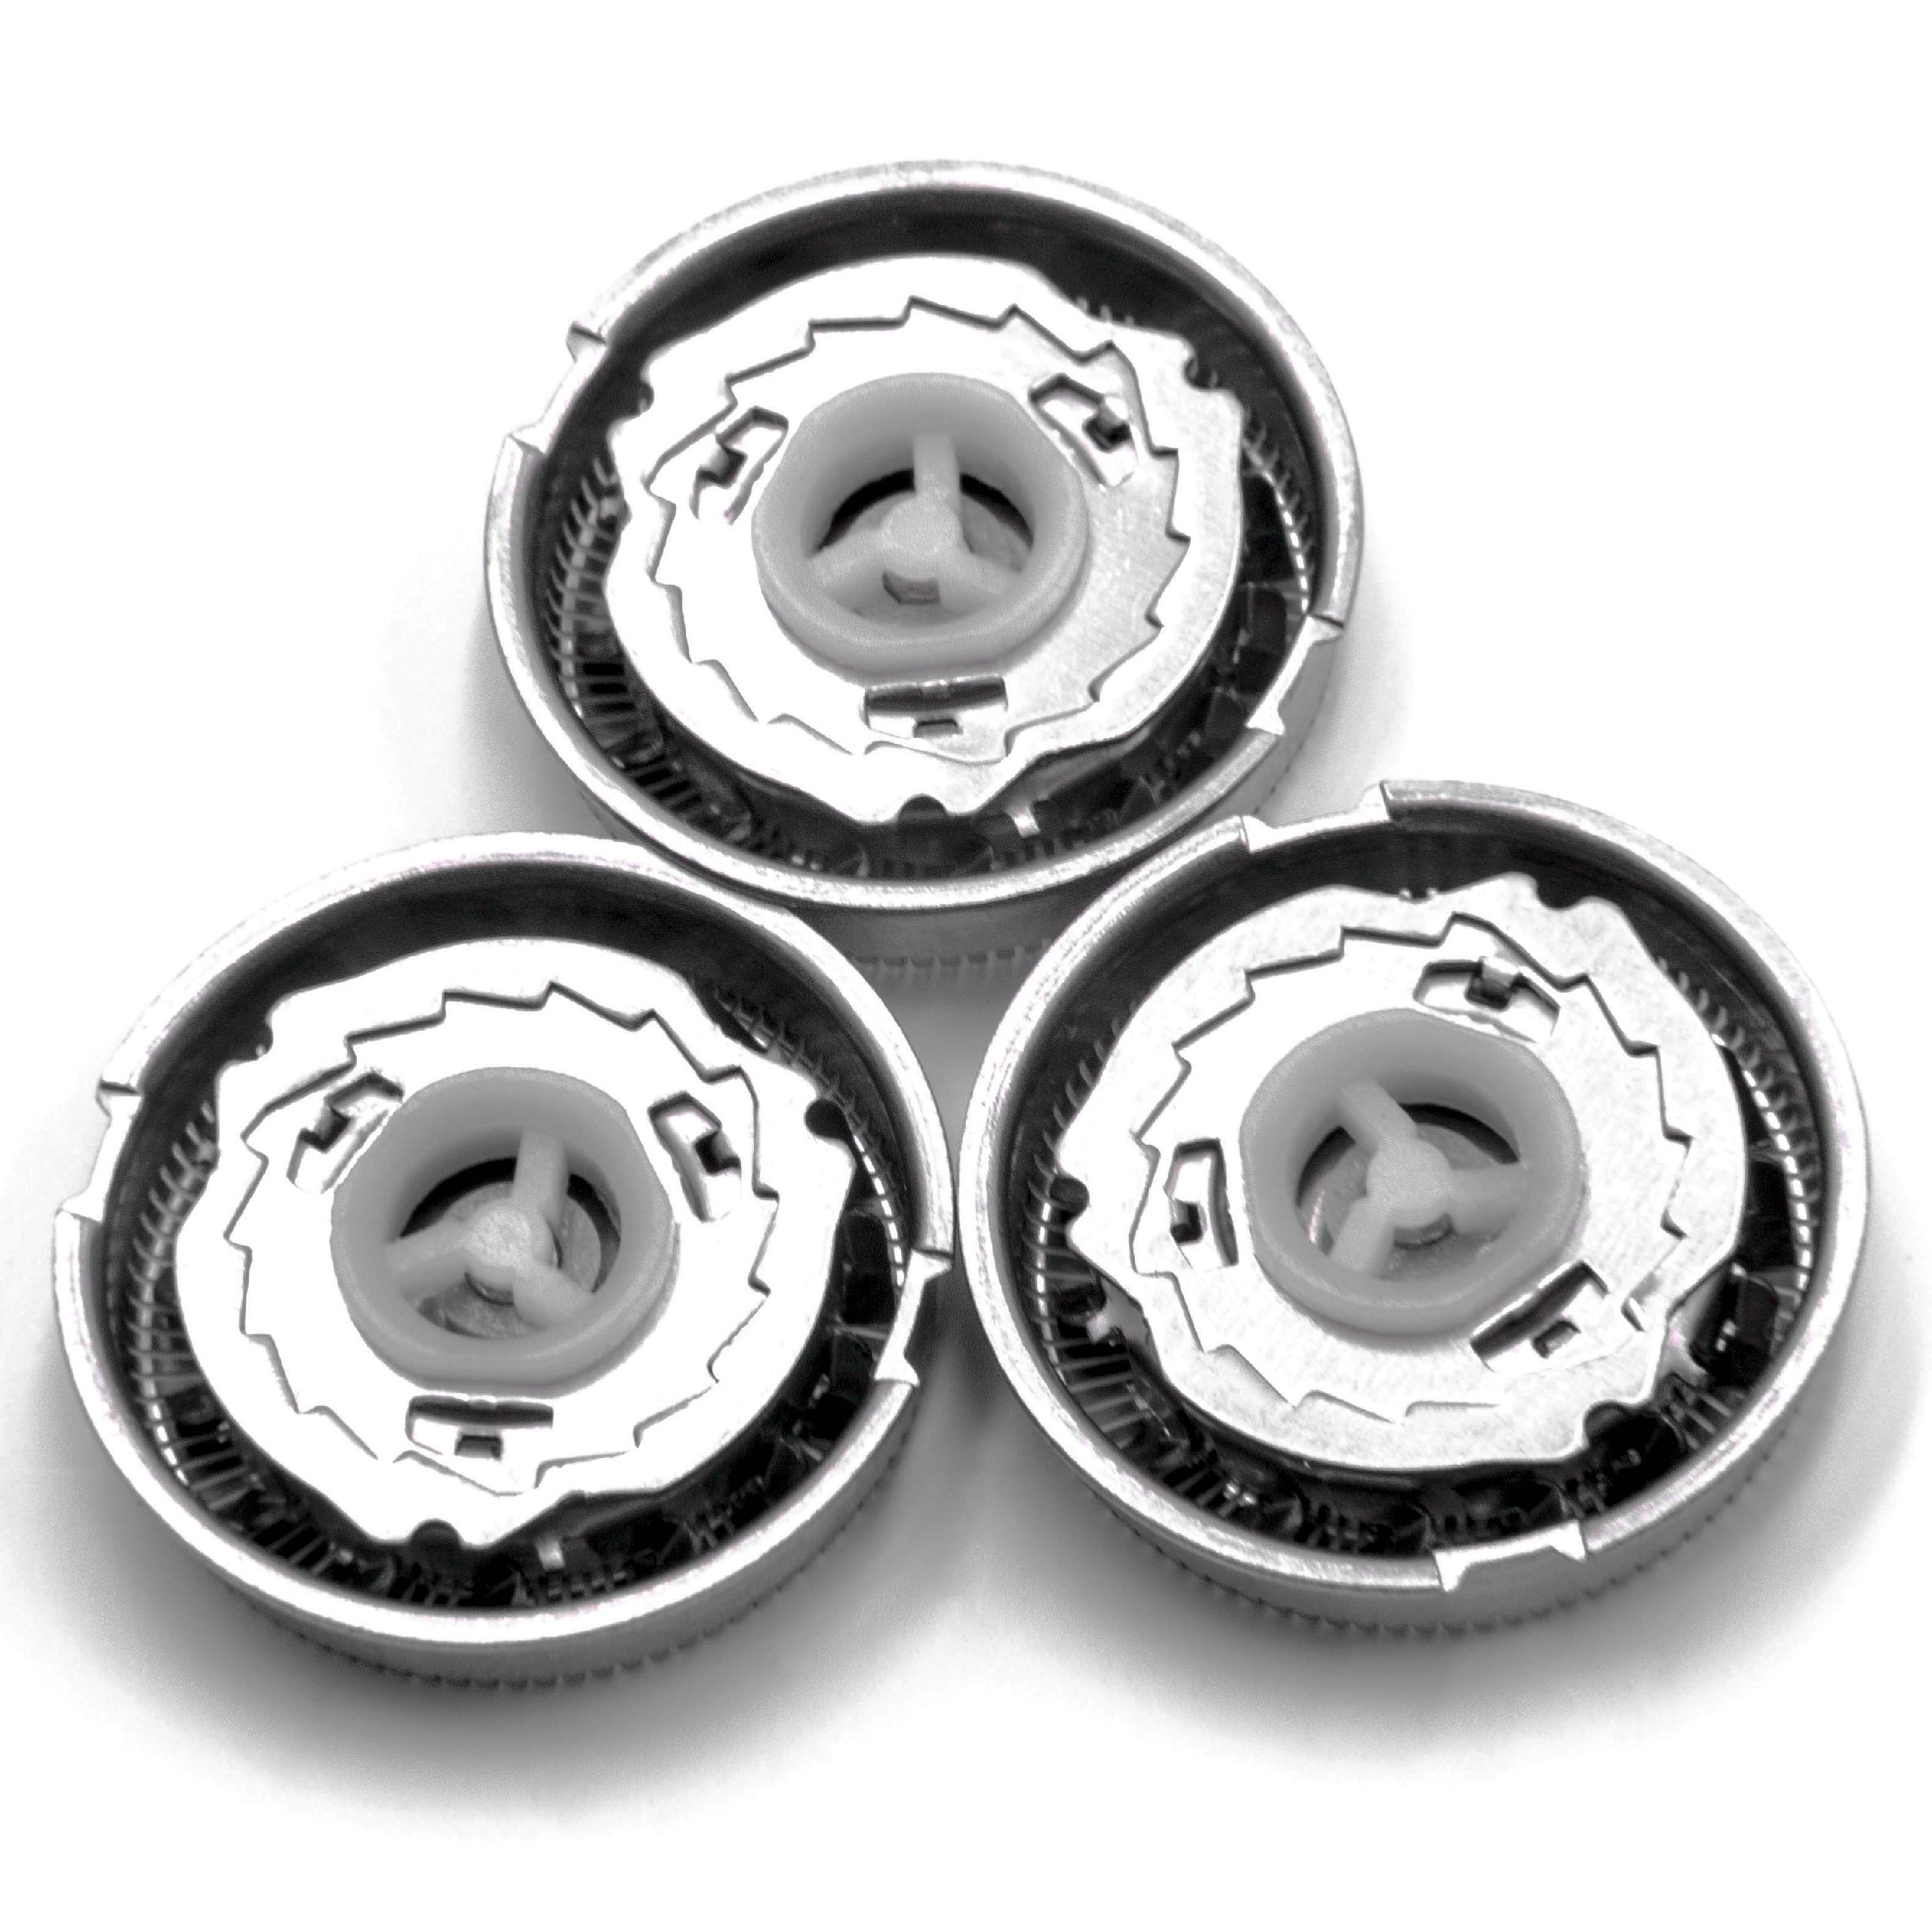 3x shaving head as Replacement for Philips HP1915L, HQ3 for Philips Shaver - Stainless Steel